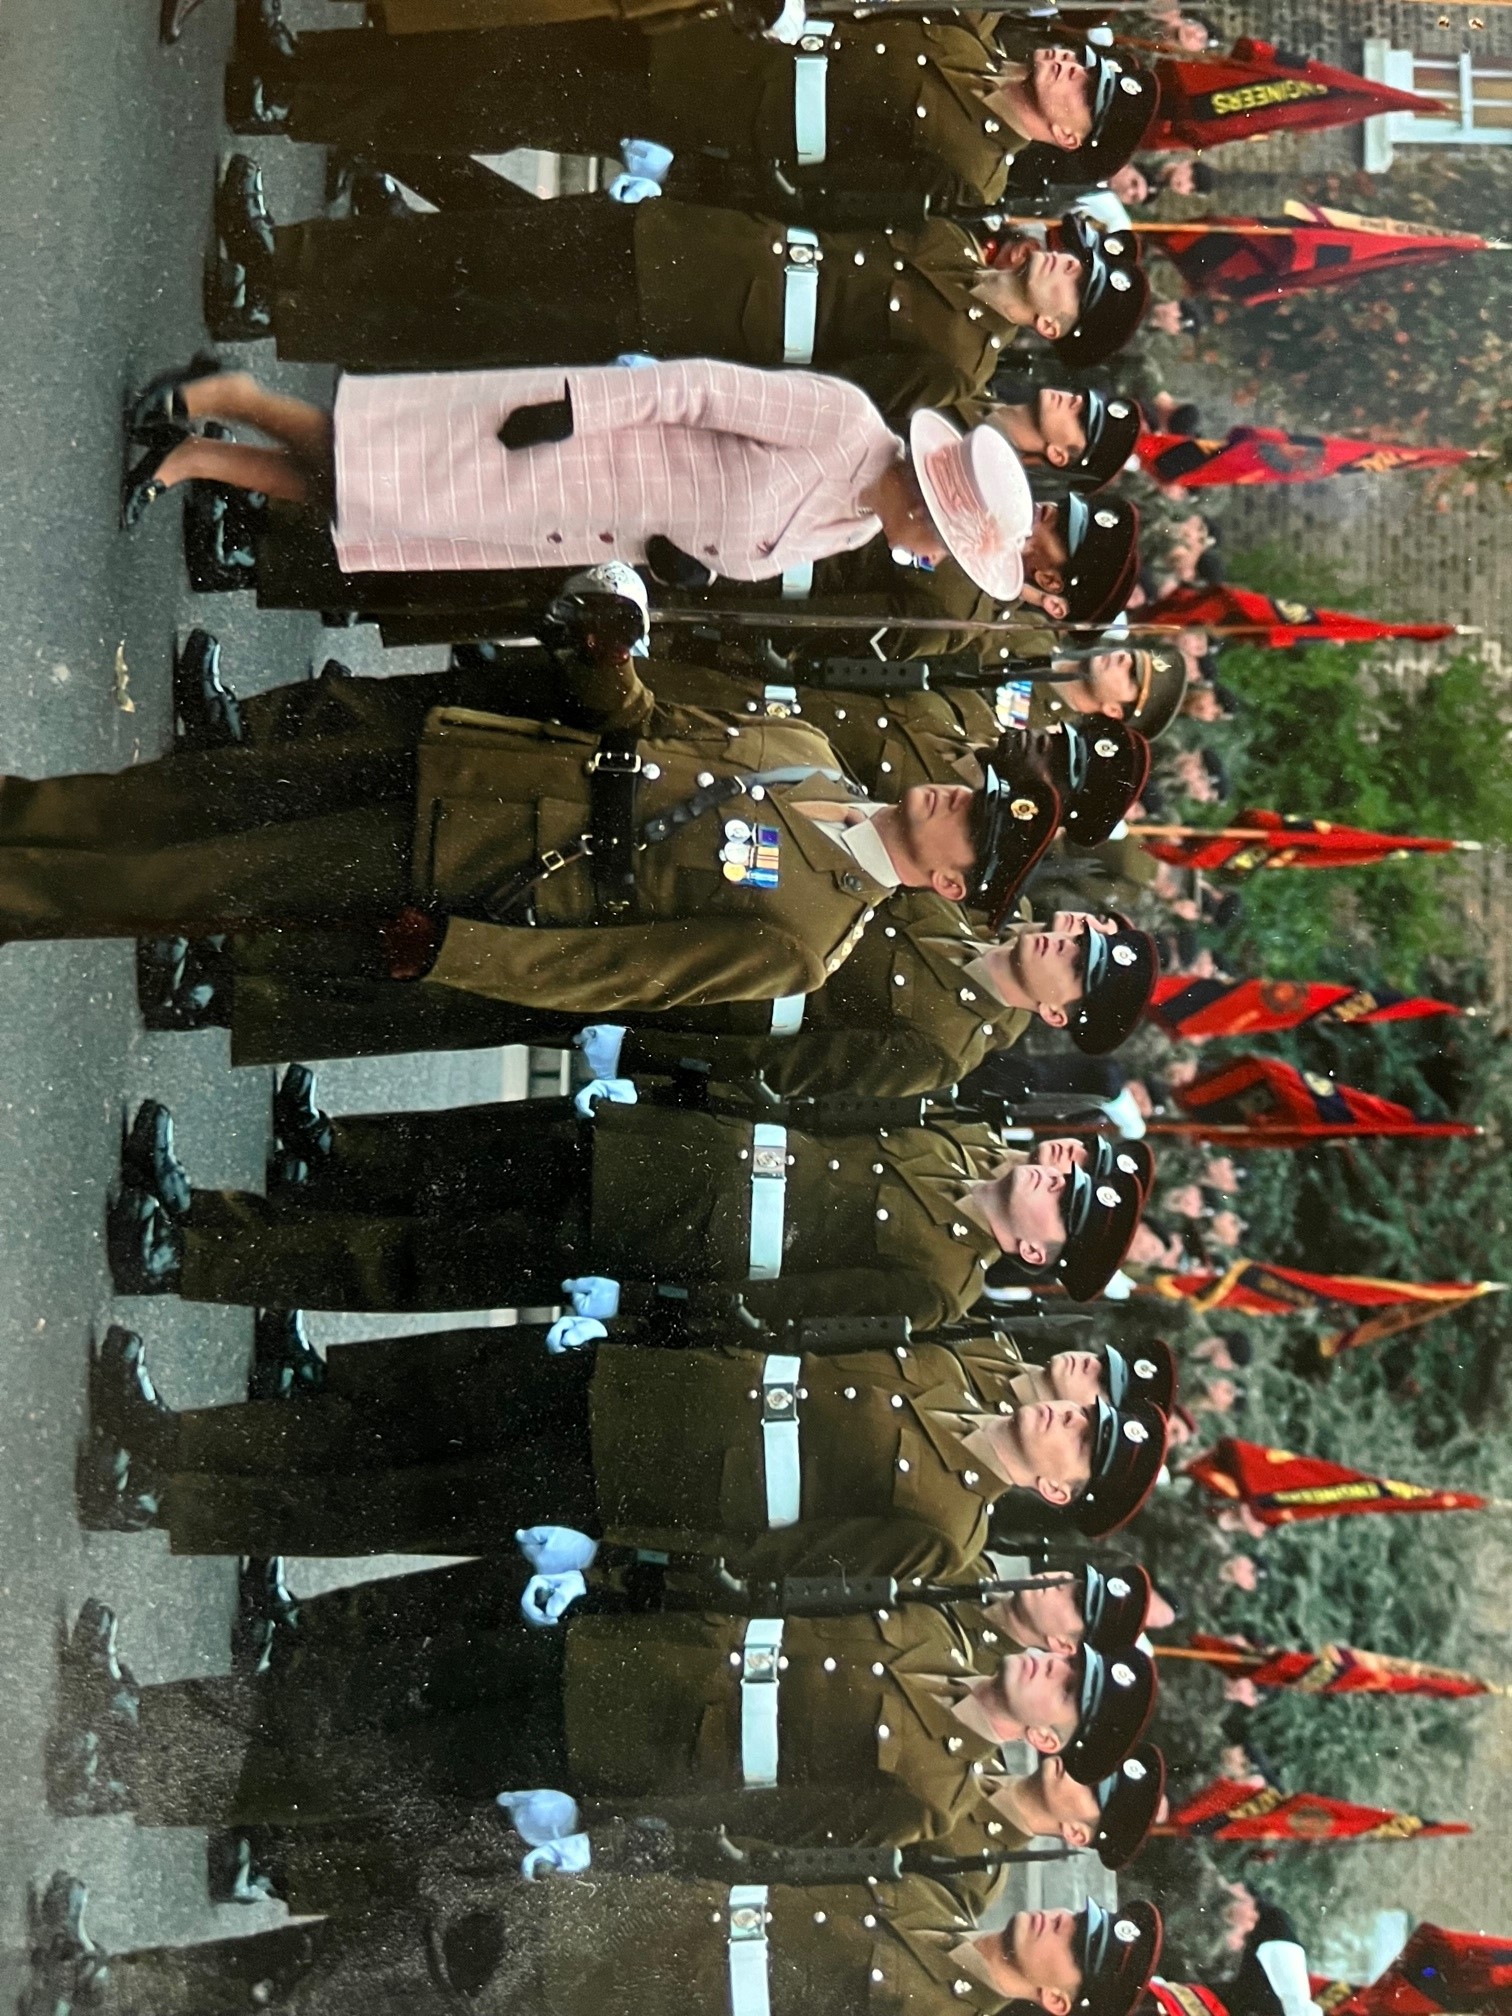 Her Majesty inspects soldiers on parade